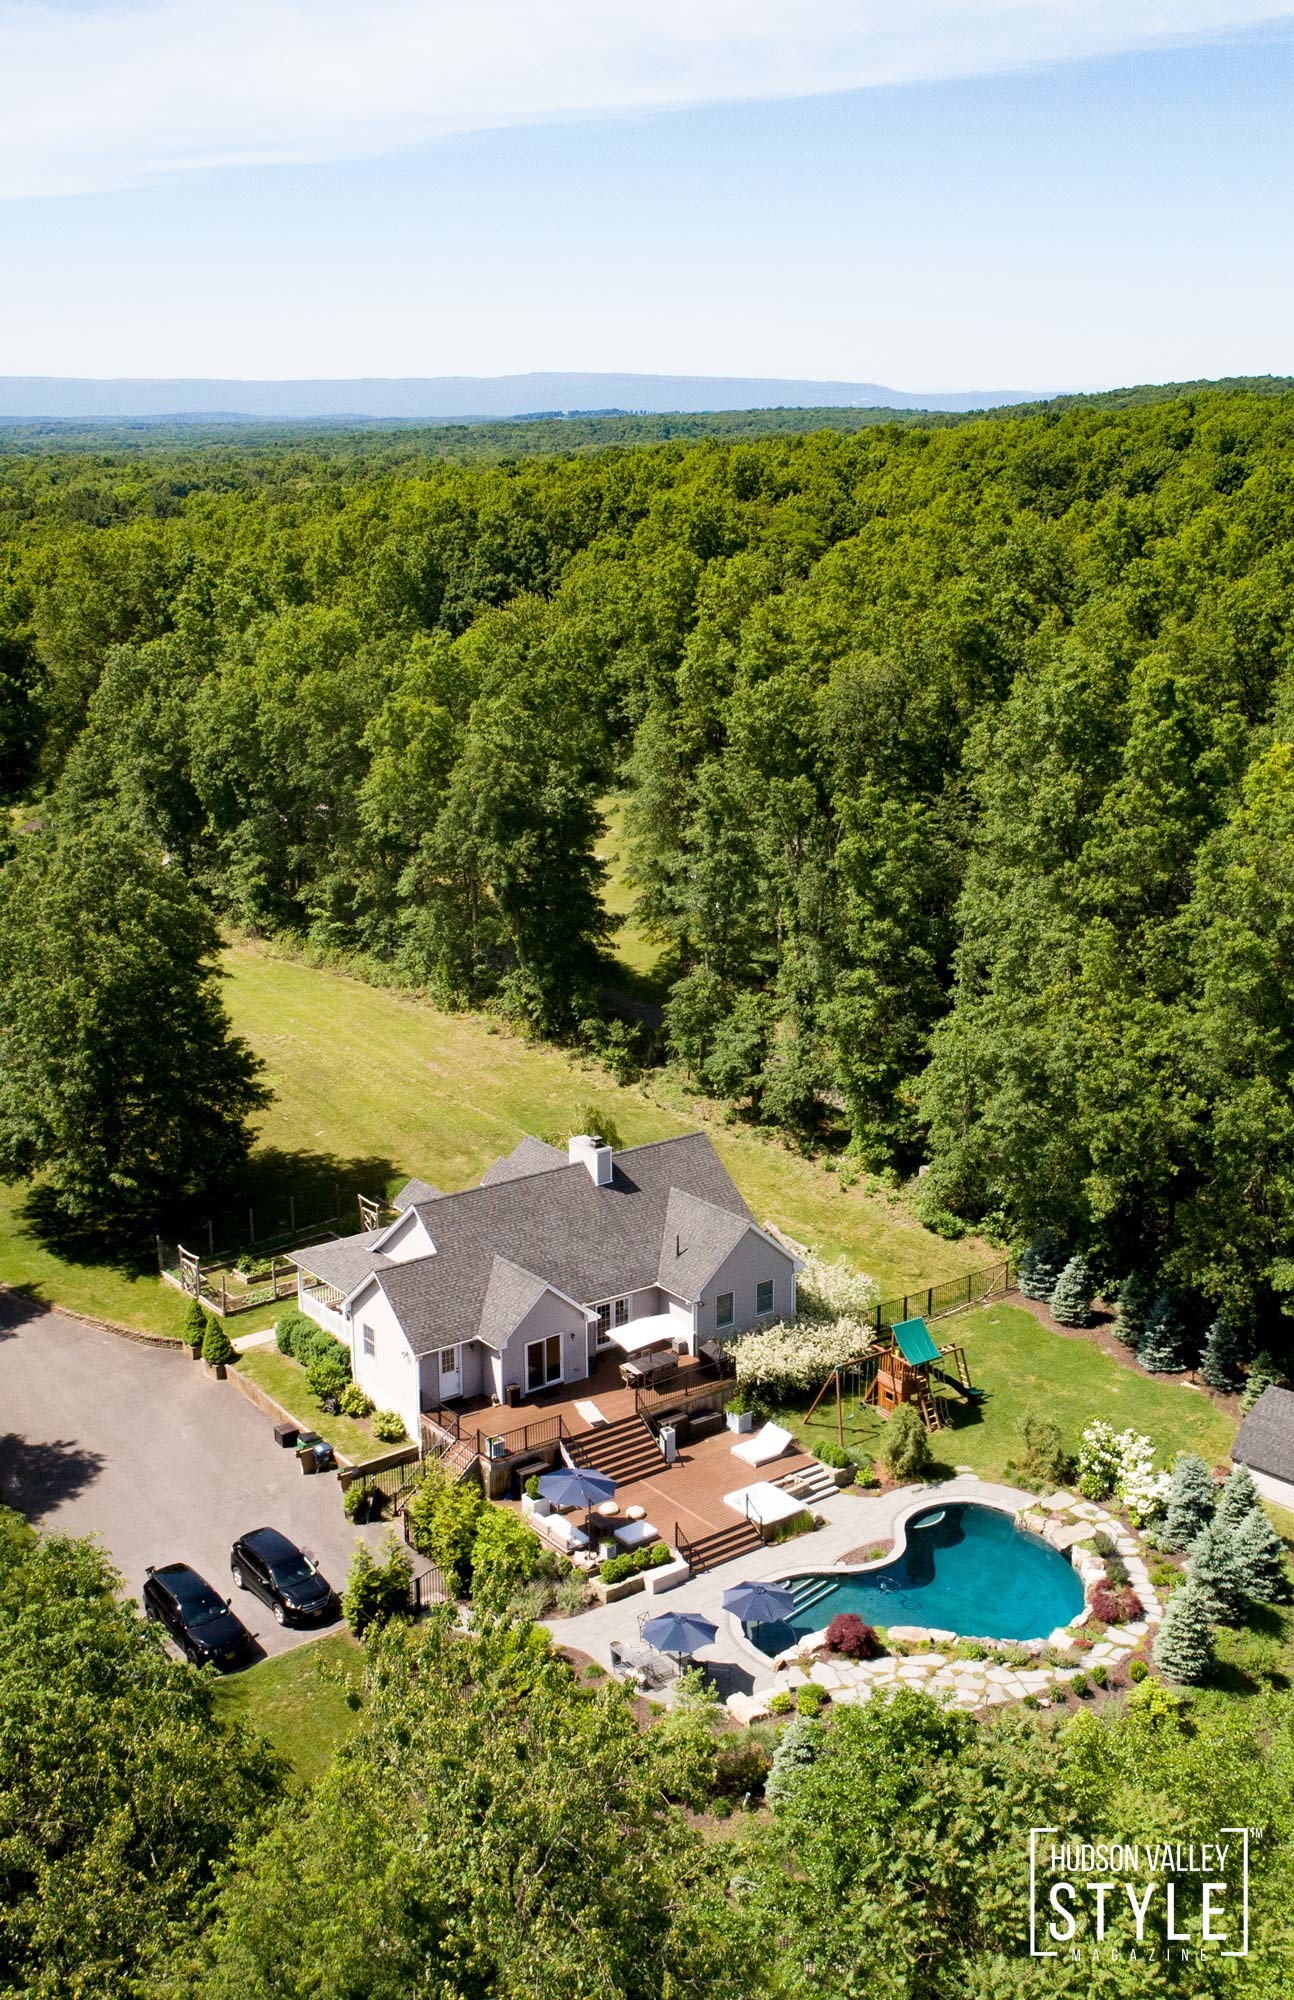 A beautiful Hudson valley Home for Sale with a heated pool, jacuzzi, 4 acres of private ATV and hiking trails and amazing modern rustic kitchen